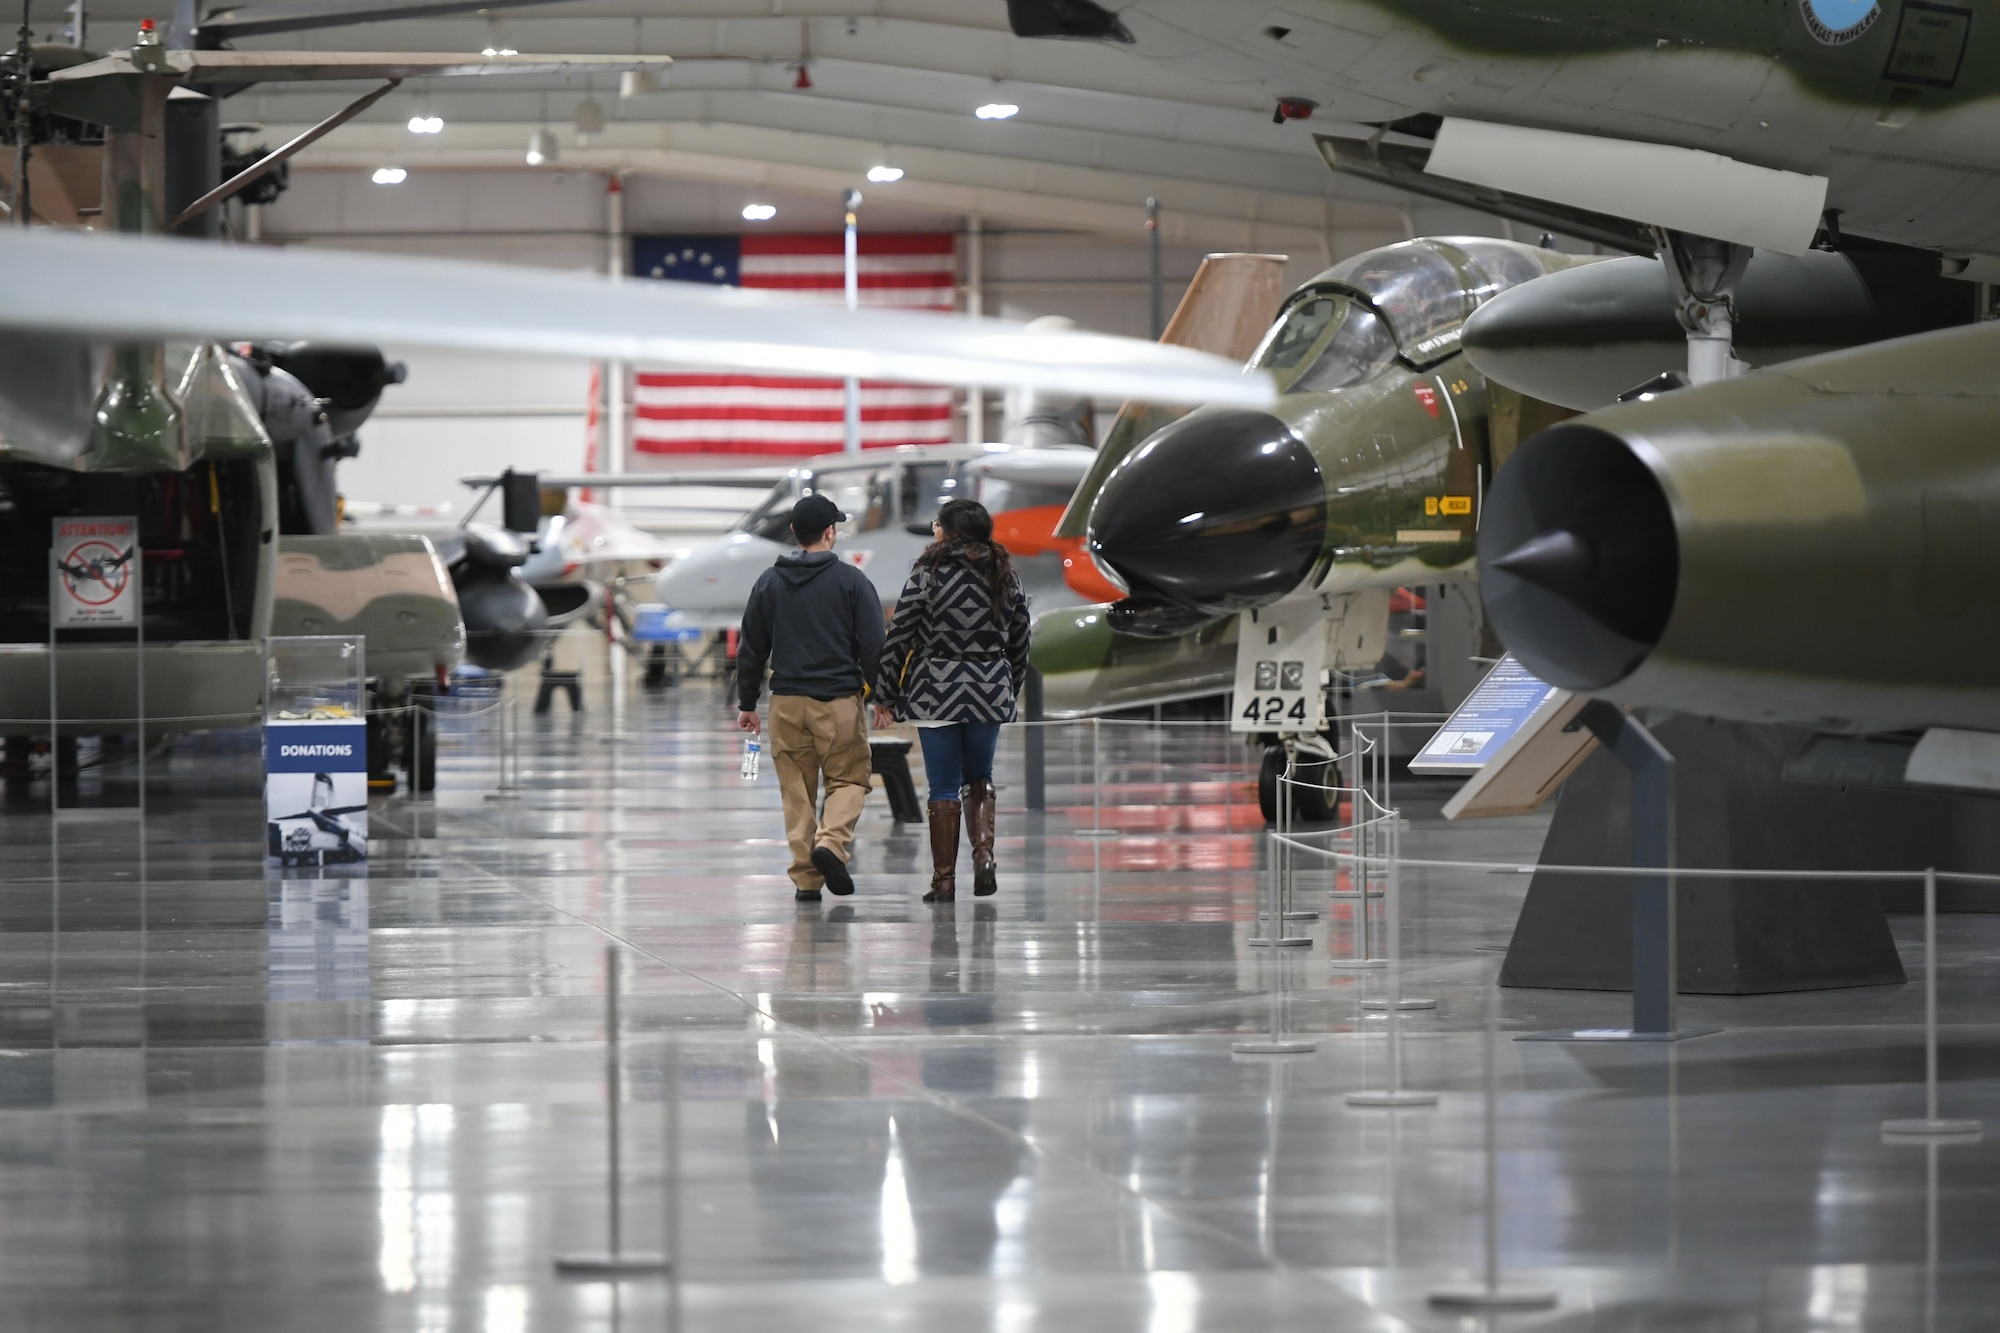 Visitors walk around the Hill Aerospace Museum Dec. 20, 2019 at Hill Air Force Base, Utah. The museum recently celebrated its 5 millionth visitor in November 2019. (U.S. Air Force photo by Cynthia Griggs)